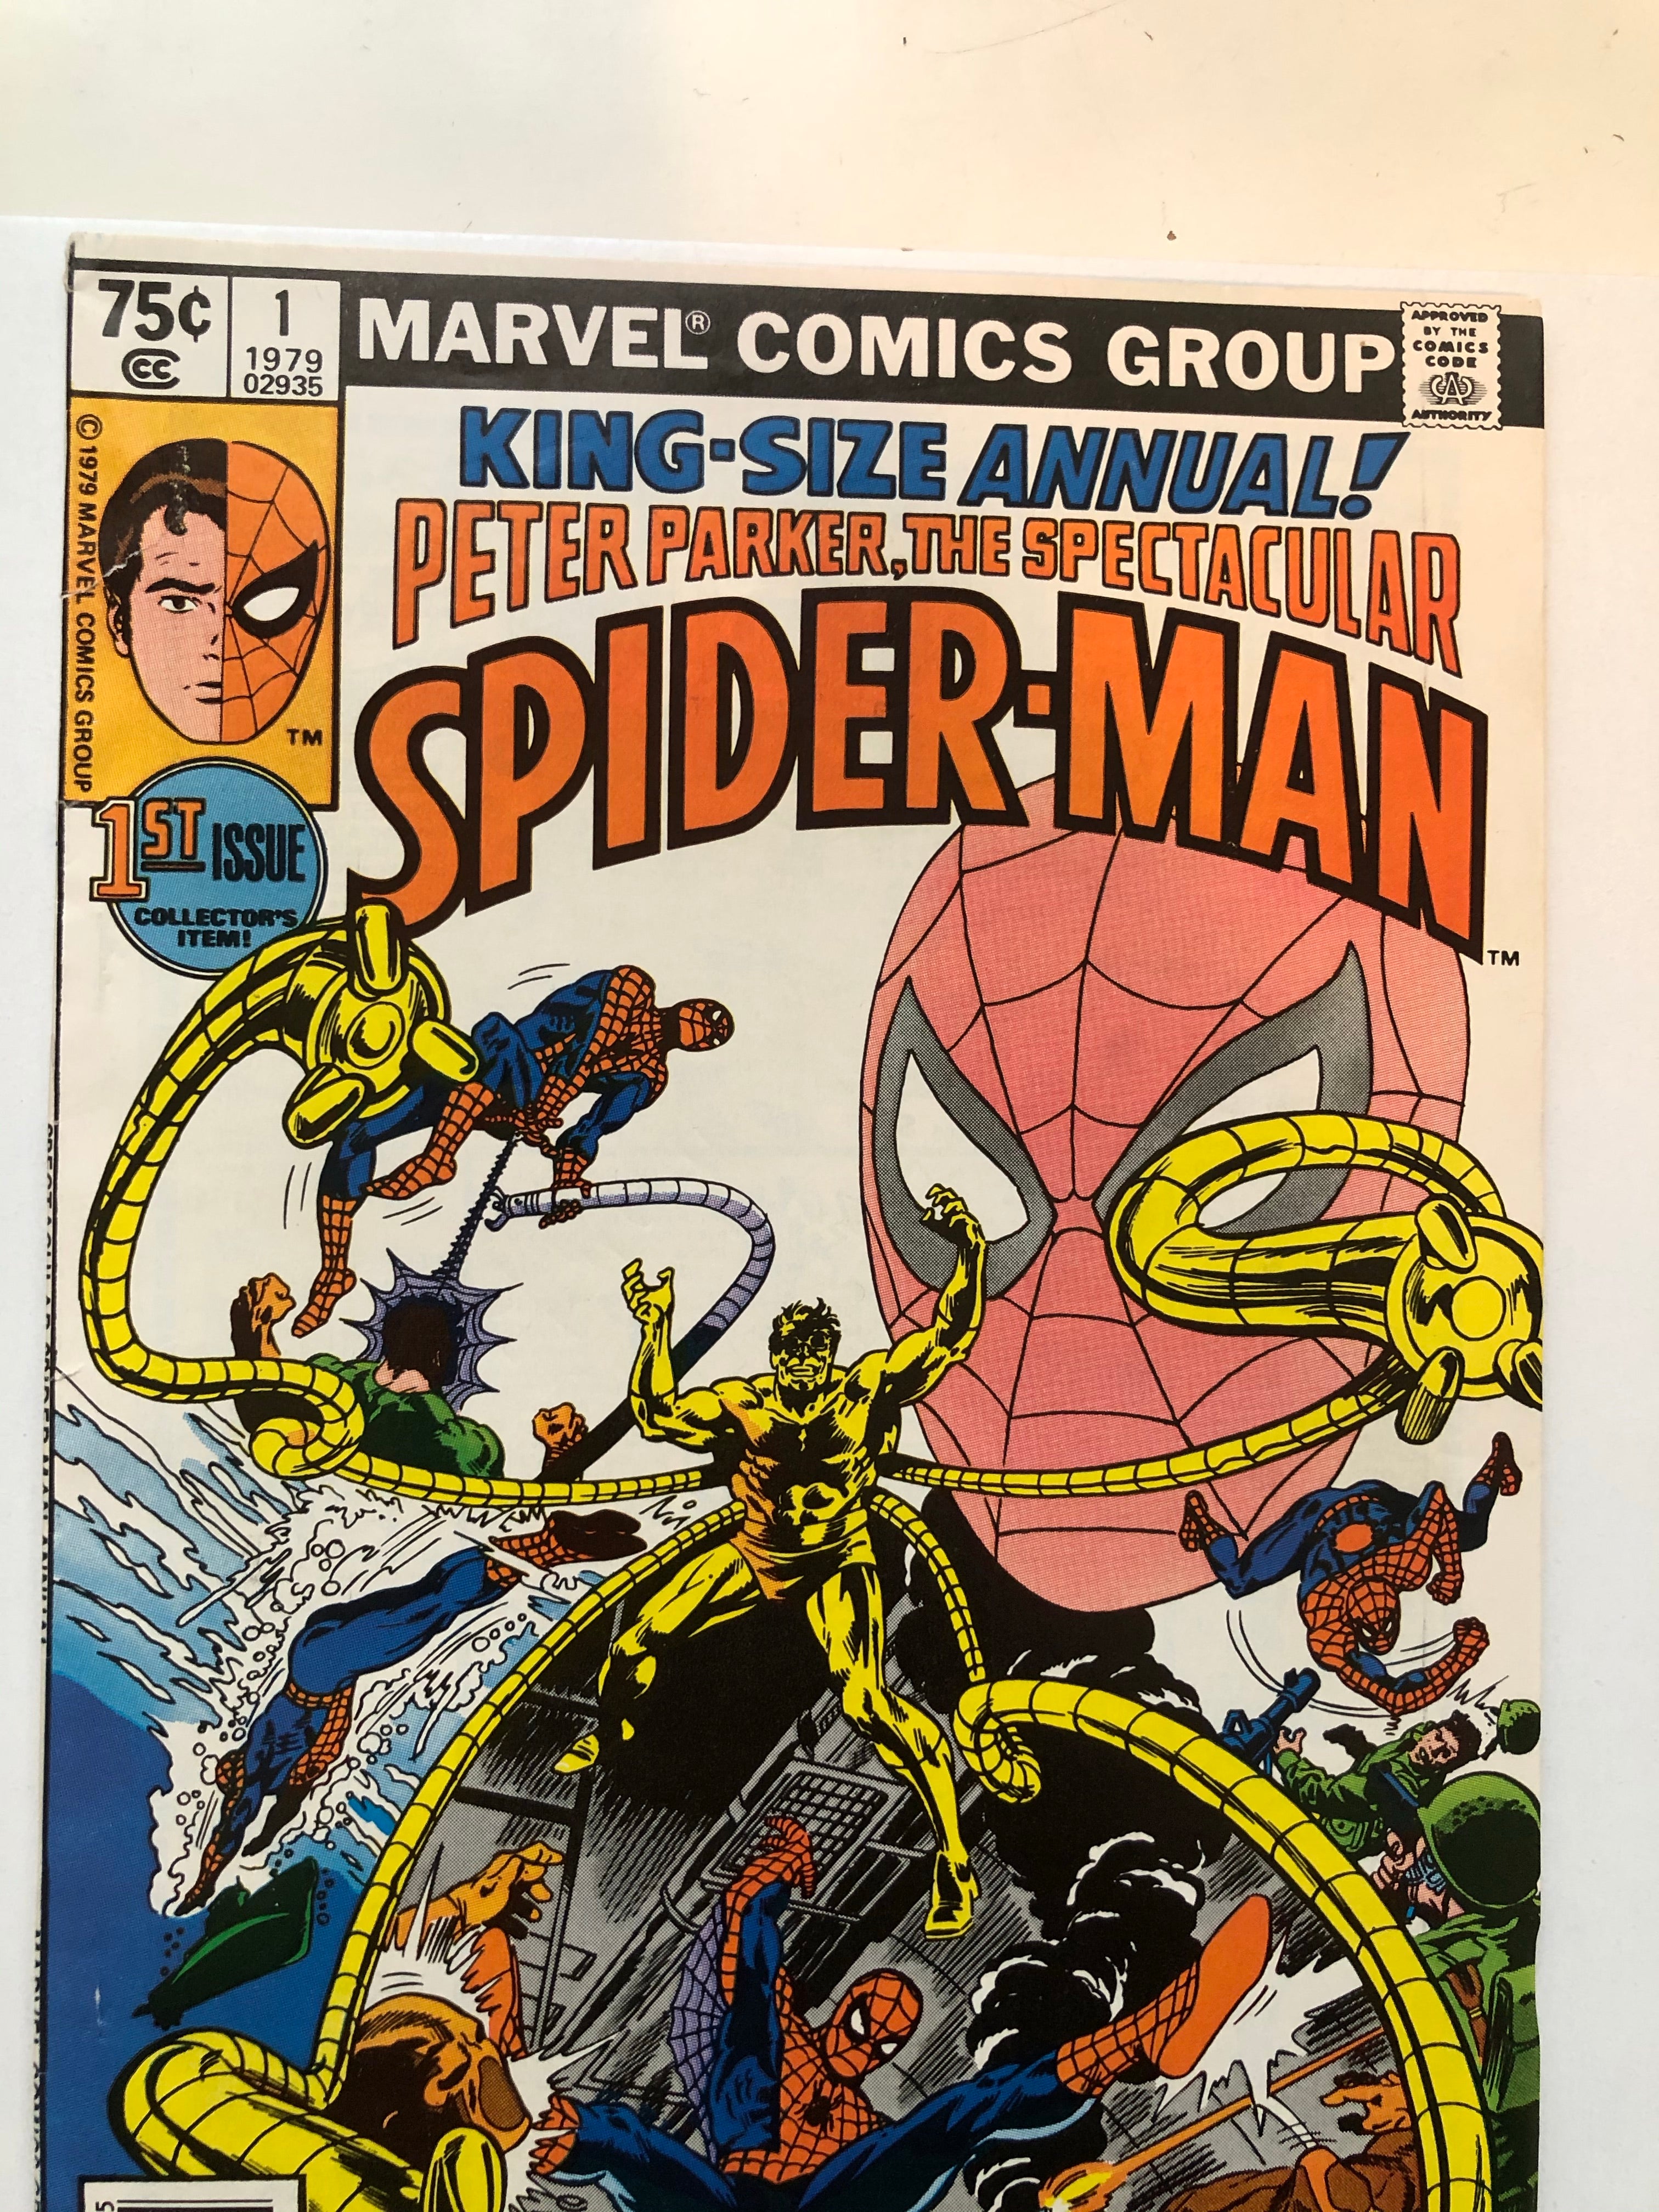 Peter Parker Spider-Man king size Annual Vf condition comic #1 1970